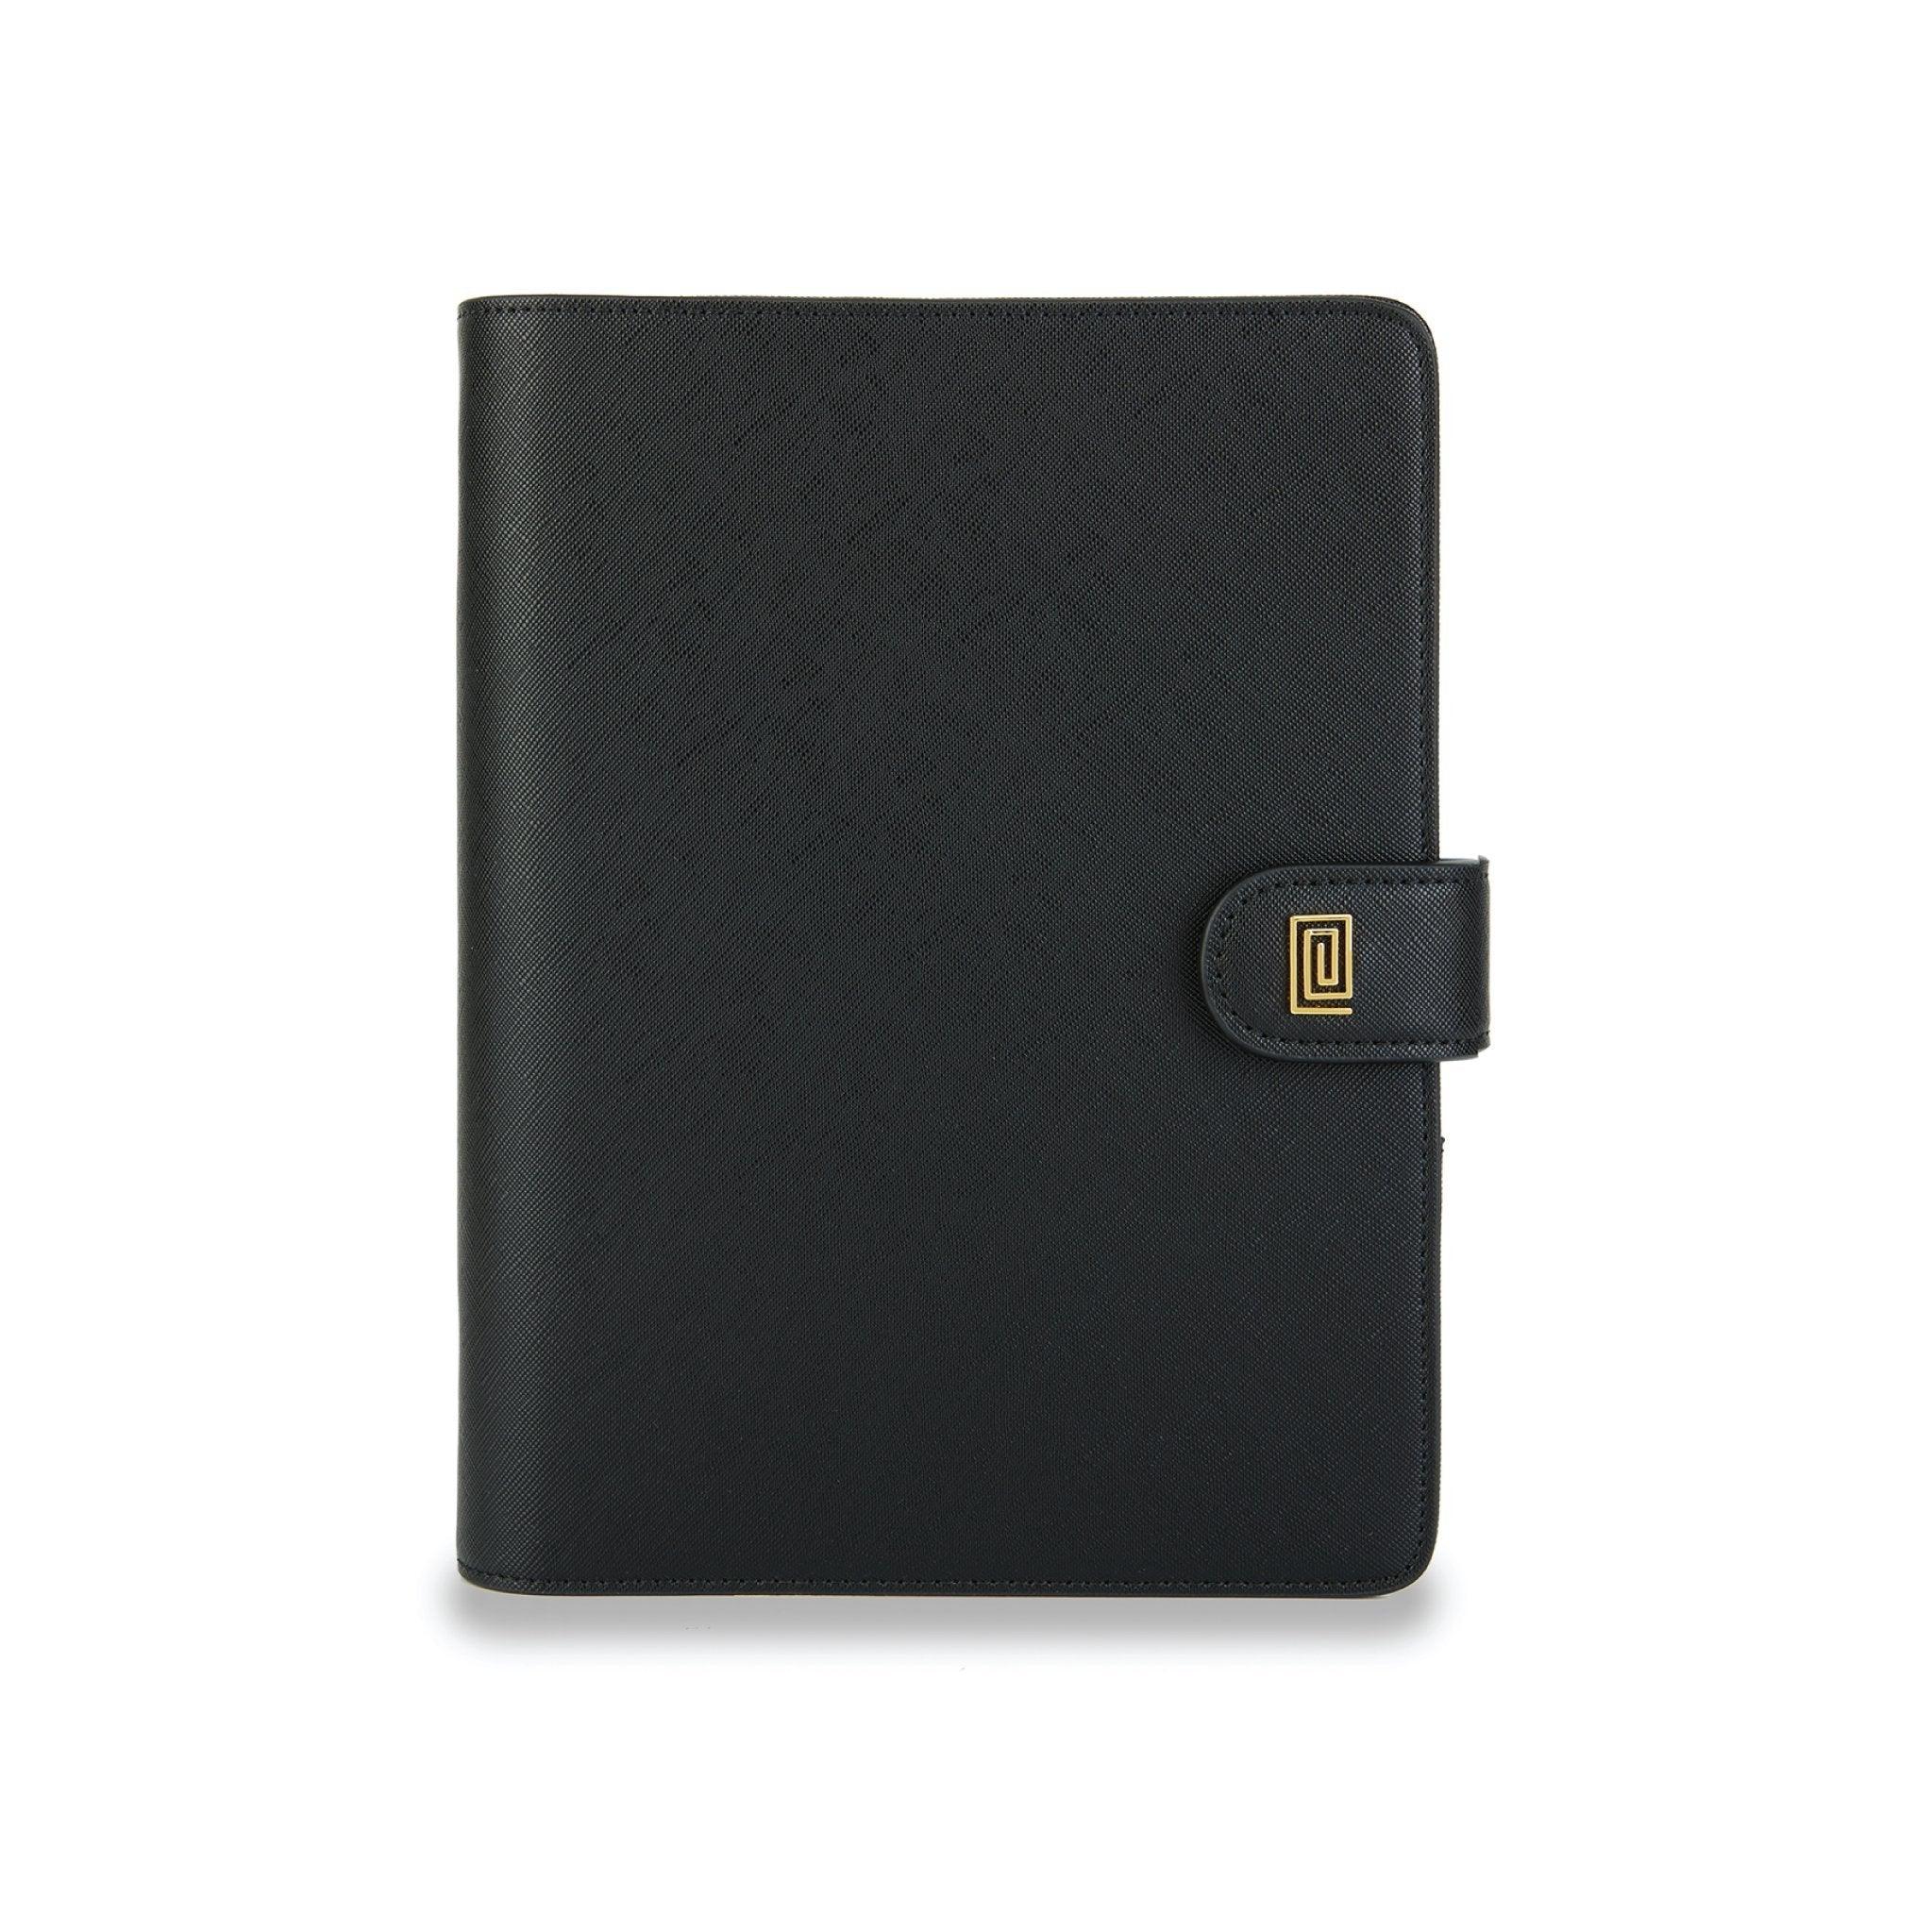 Gold on Jet Black Saffiano Euro Ring | OUTLET | SS1. Euro Ring Agenda | A6 Planner Cover | Final Sale | NOTIQ